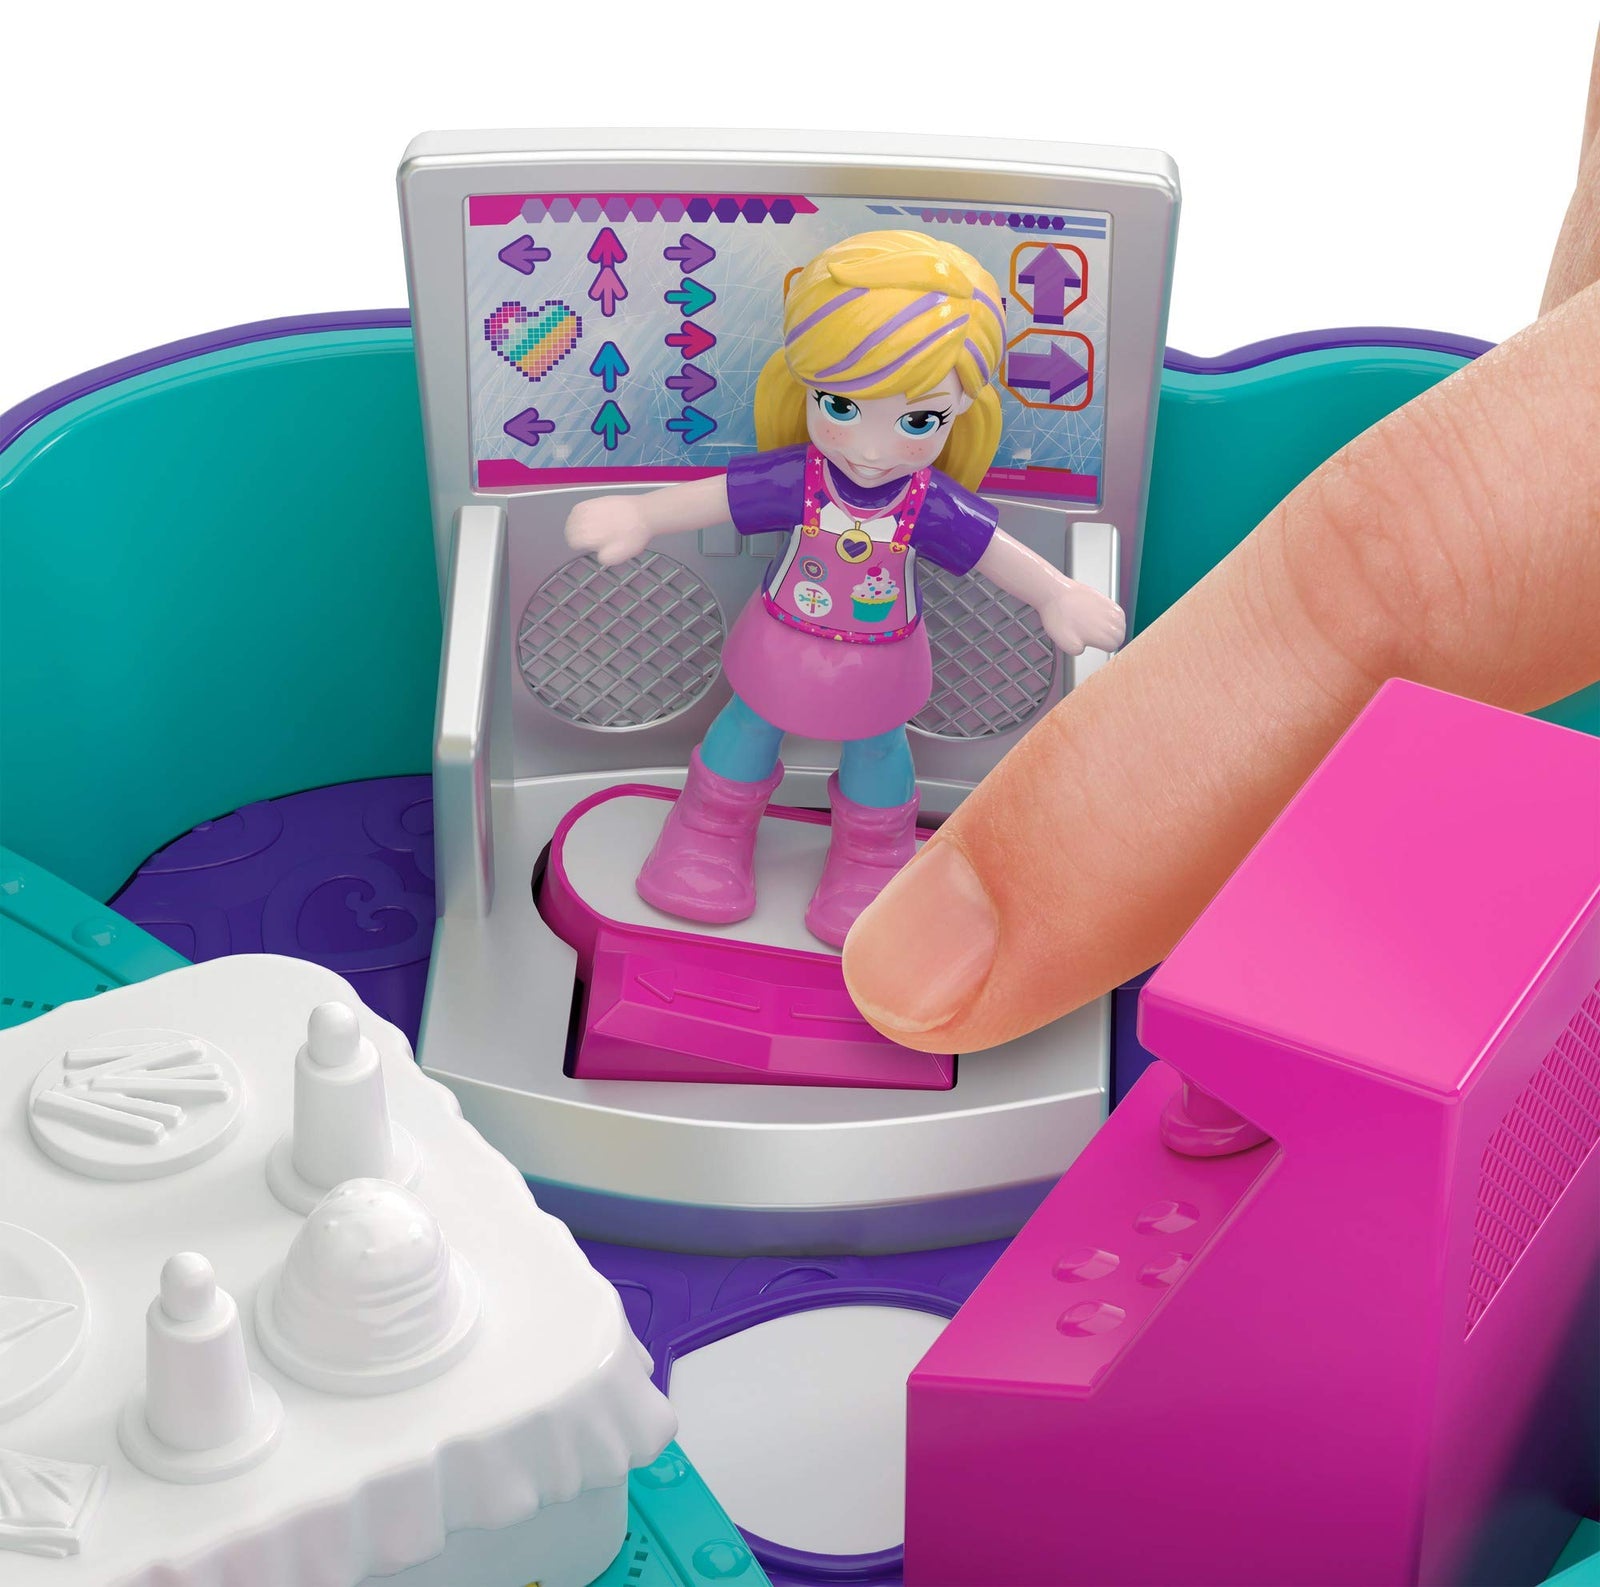 Polly Pocket Pocket World Cupcake Compact with Surprise Reveals, Micro Dolls & Accessories [Amazon Exclusive], multicolor, standard (FRY36)